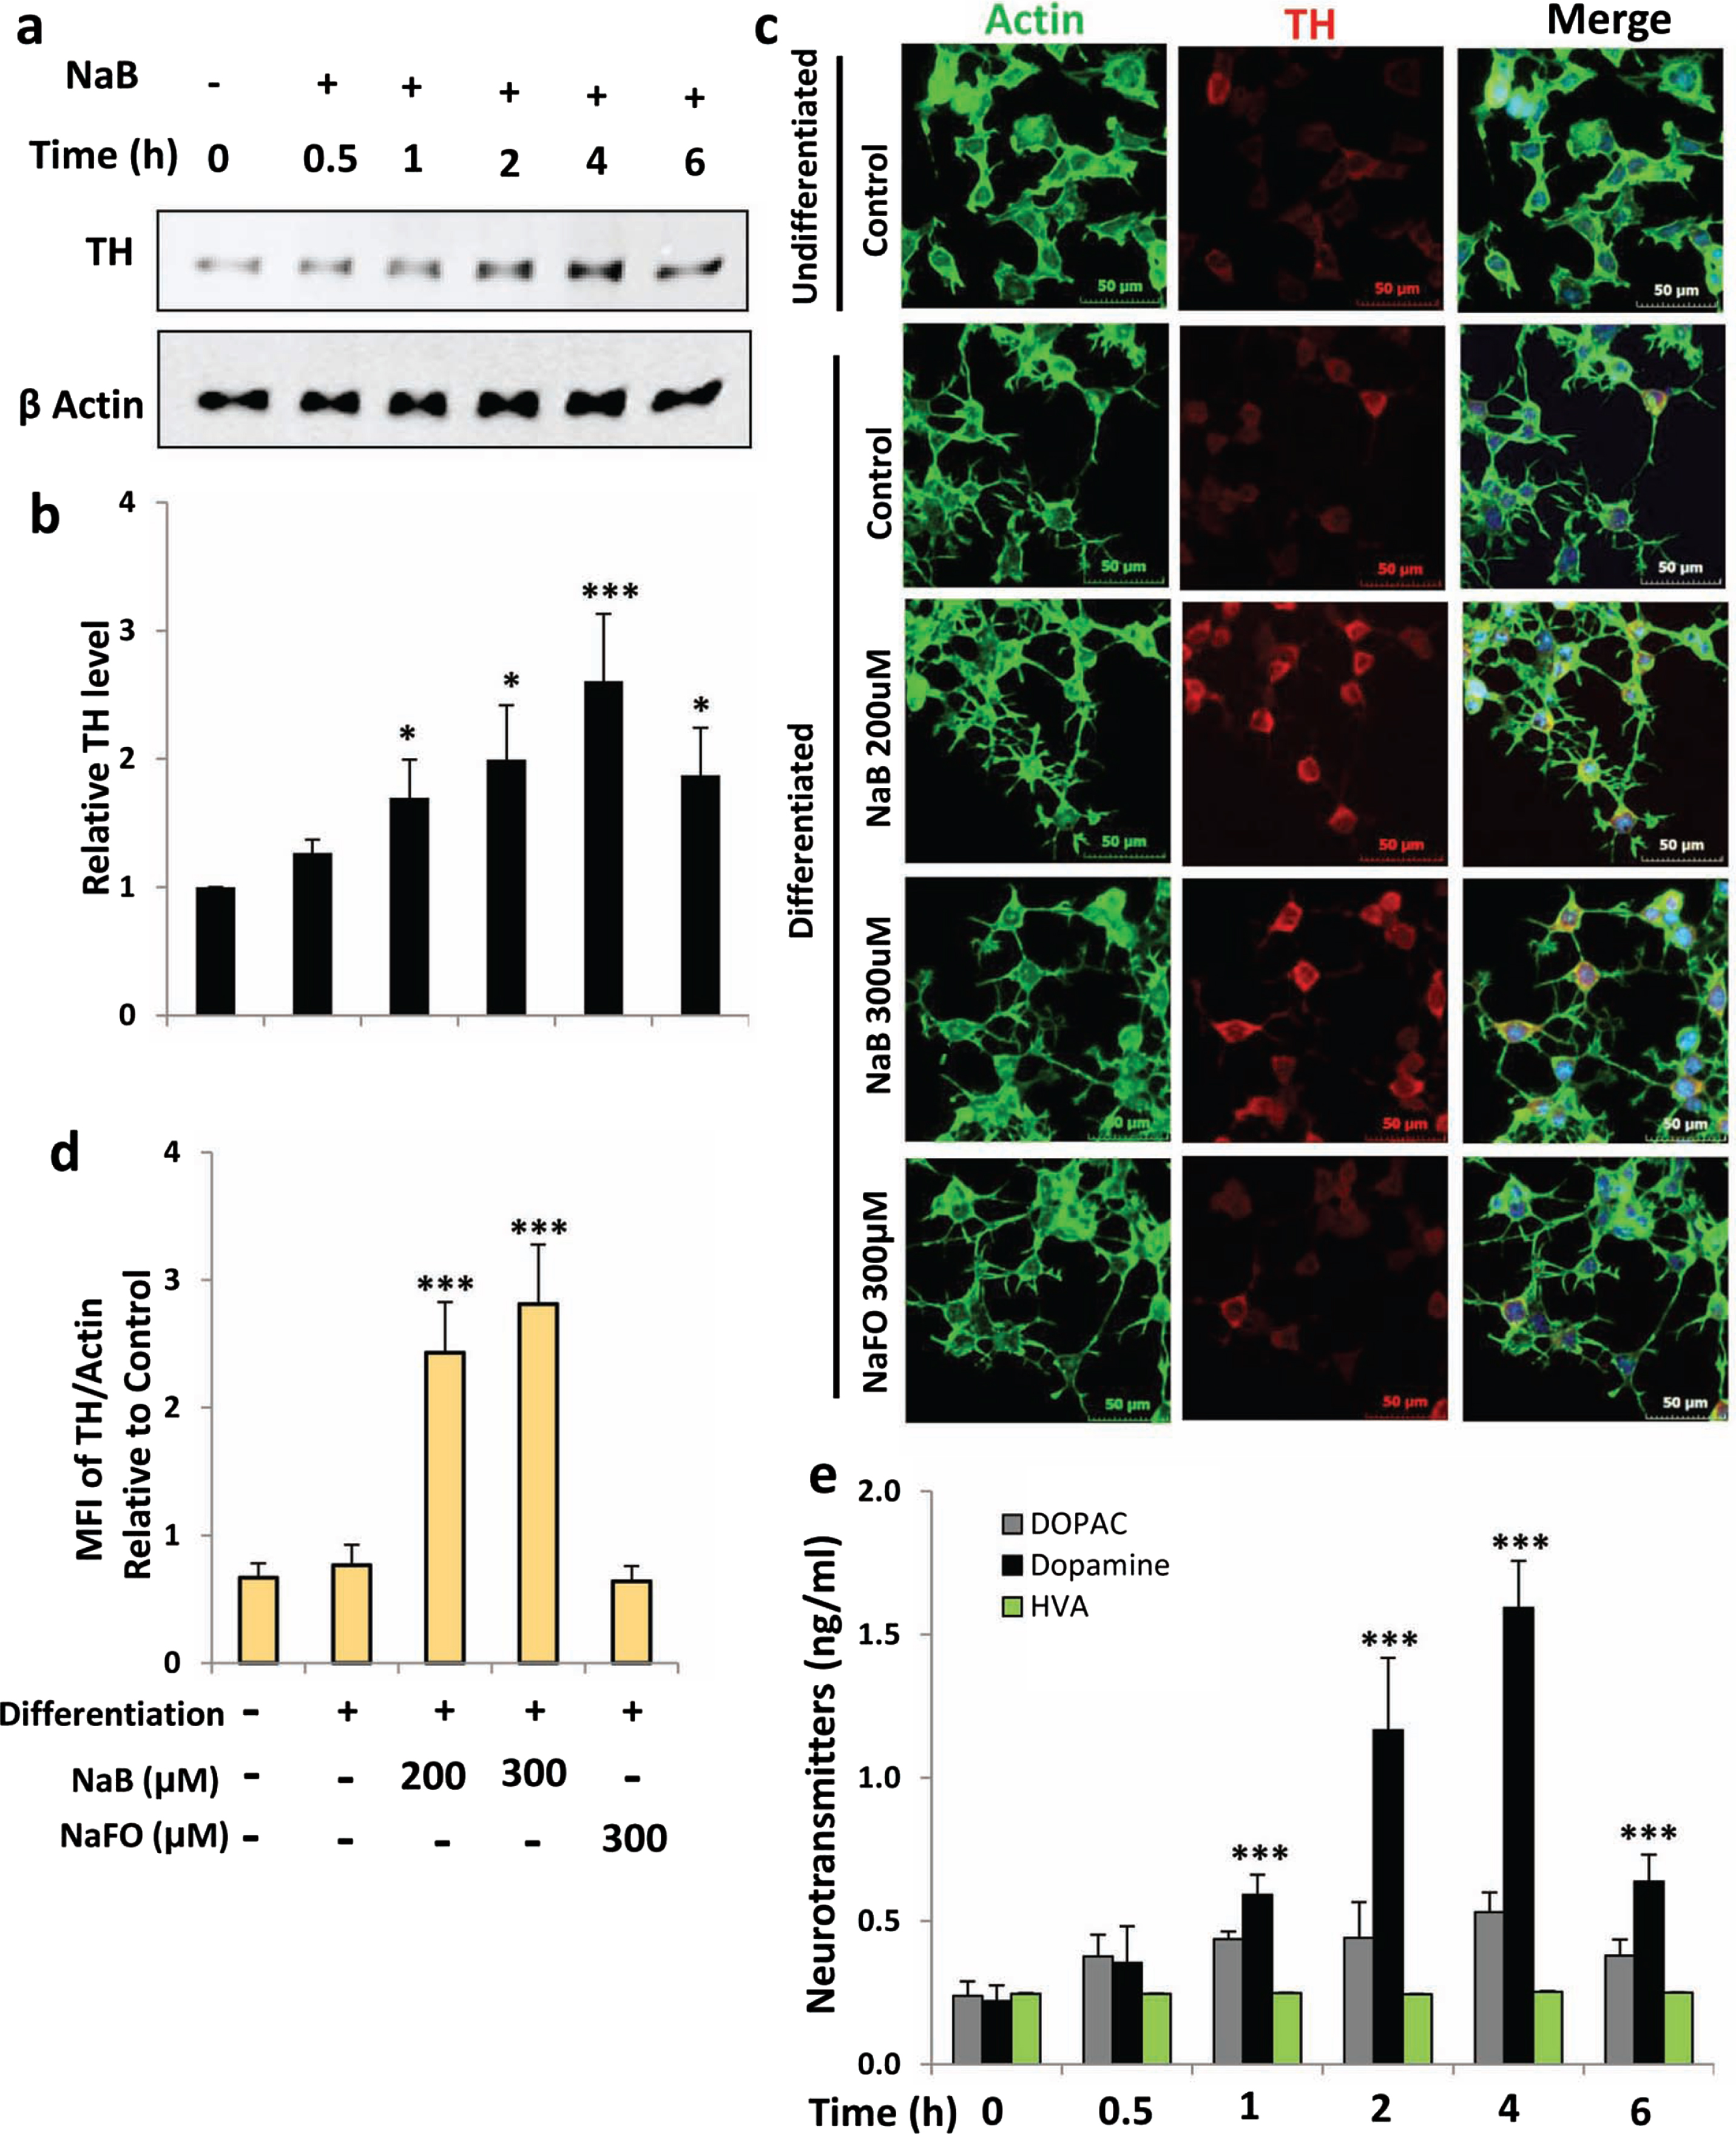 NaB increases TH and dopamine in differentiated mouse MN9D neuronal cells. A) Mouse MN9D neuronal cells were allowed to differentiate in neurobasal media containing B27 for 2 d following treatment with 200μM NaB for different time periods in neurobasal media without B27. The protein level of TH was monitored by western blot (A). Bands were scanned and values (TH/actin) presented as relative to control (B). Results are mean±SD of different experiments. *p < 0.05 and ***p < 0.001 versus control. Cells were treated with NaB and NaFO for 2 h followed by double-label immunofluorescence with antibodies against TH and actin (C). Mean fluorescence intensity (MFI) of TH and actin was calculated in 20 different cells (D) and presented as MFI-TH/MFI-actin. Results are mean±SEM of 20 different cells per group. ***p < 0.001 versus control; ns, not significant. E) Cells were treated with 200μM NaB for different time periods followed by measuring the level of DA, DOPAC, and HVA in supernatants by HPLC. Results are mean±SD of at least three independent experiments. ***p < 0.001 versus control. One-way ANOVA with Tukey’s multiple comparison test shows that time-dependent increase in DA by NaB is significant (p < 0.0001).